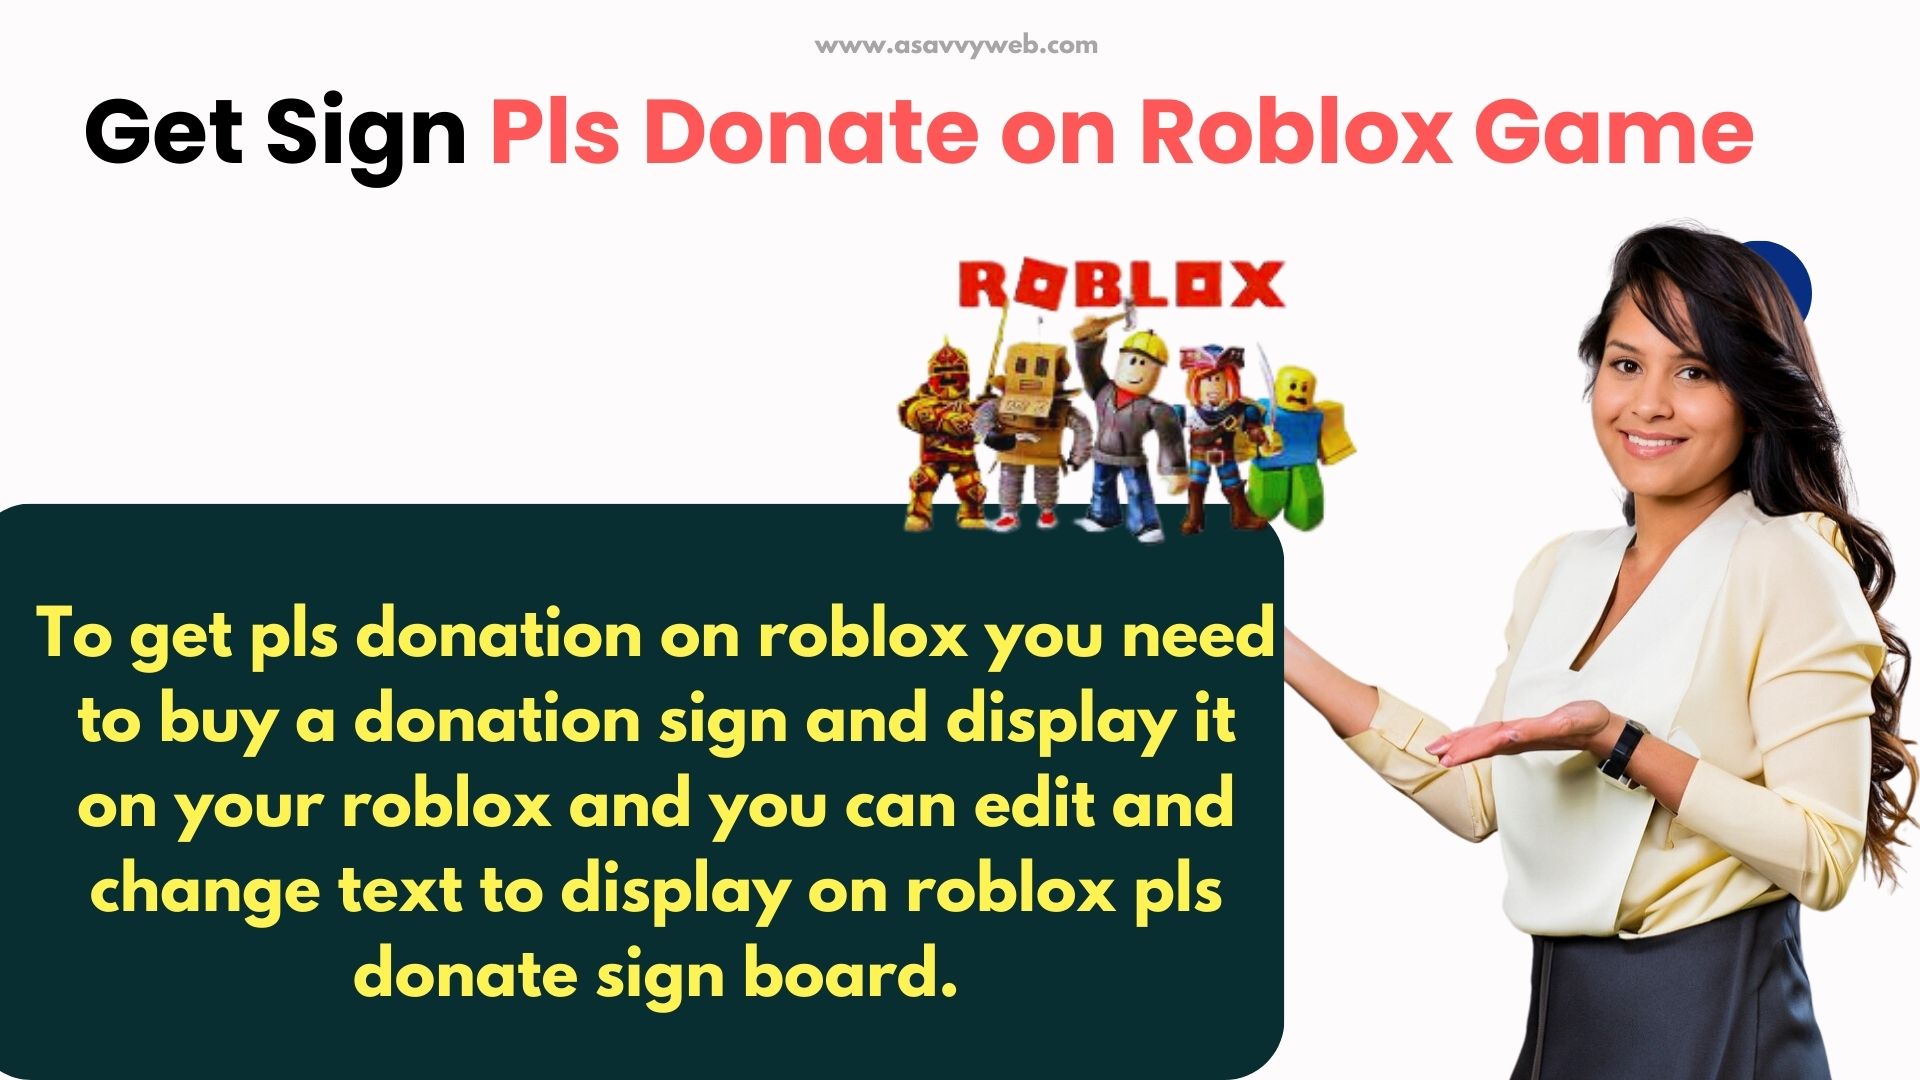 How To Make A Gamepass in Roblox Pls Donate - iOS & Android 